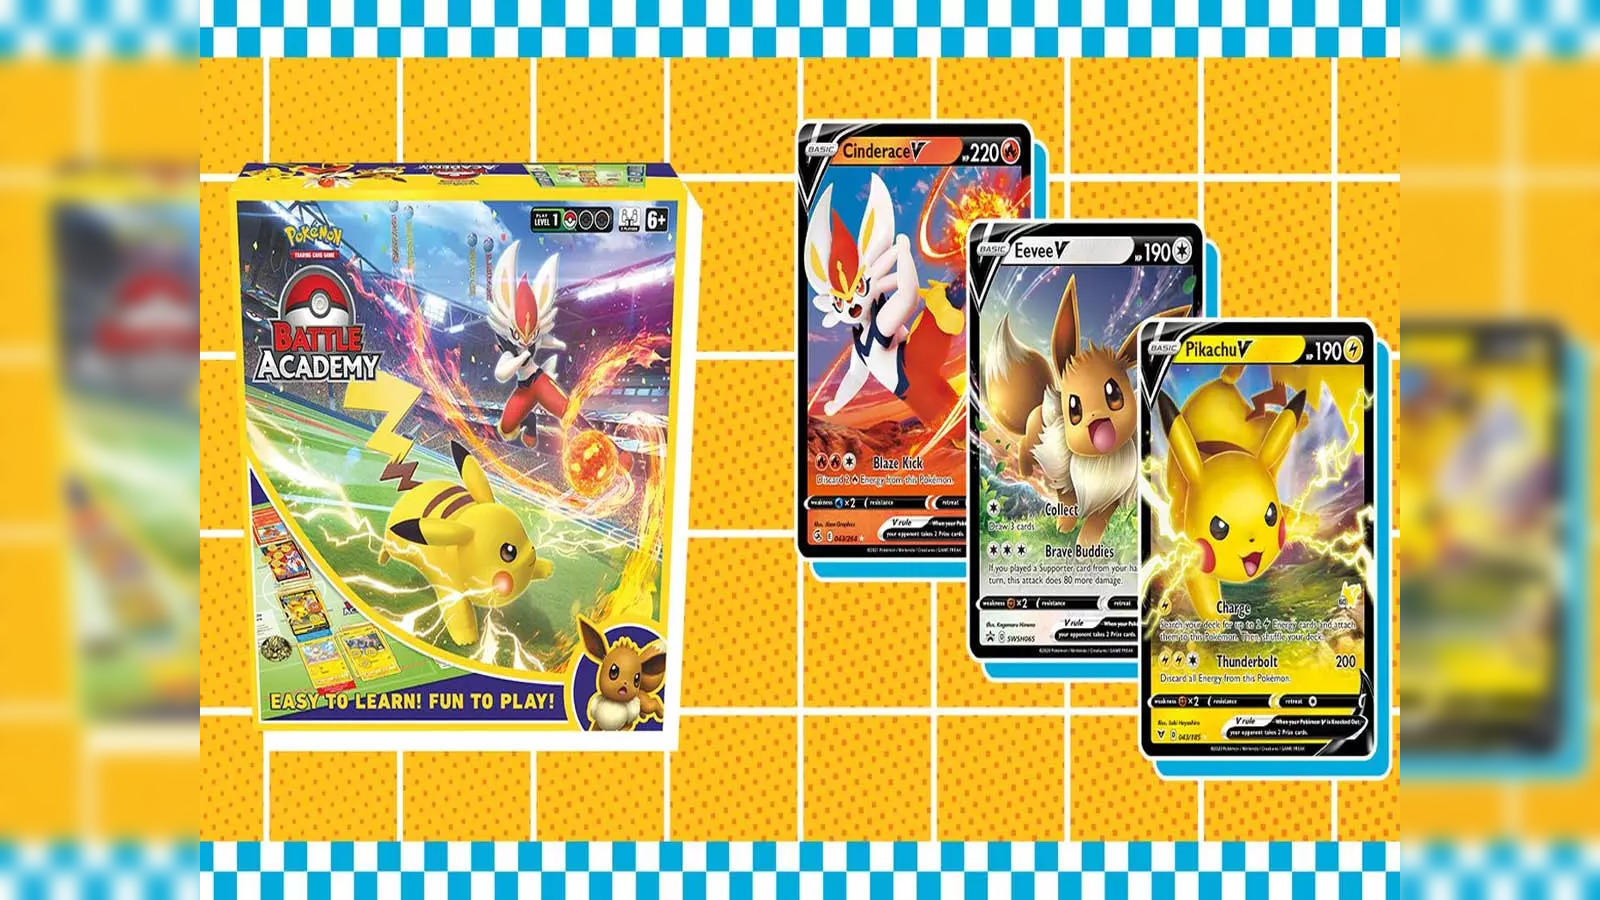 Pokémon TCG Live: Everything you need to know, and how to get started